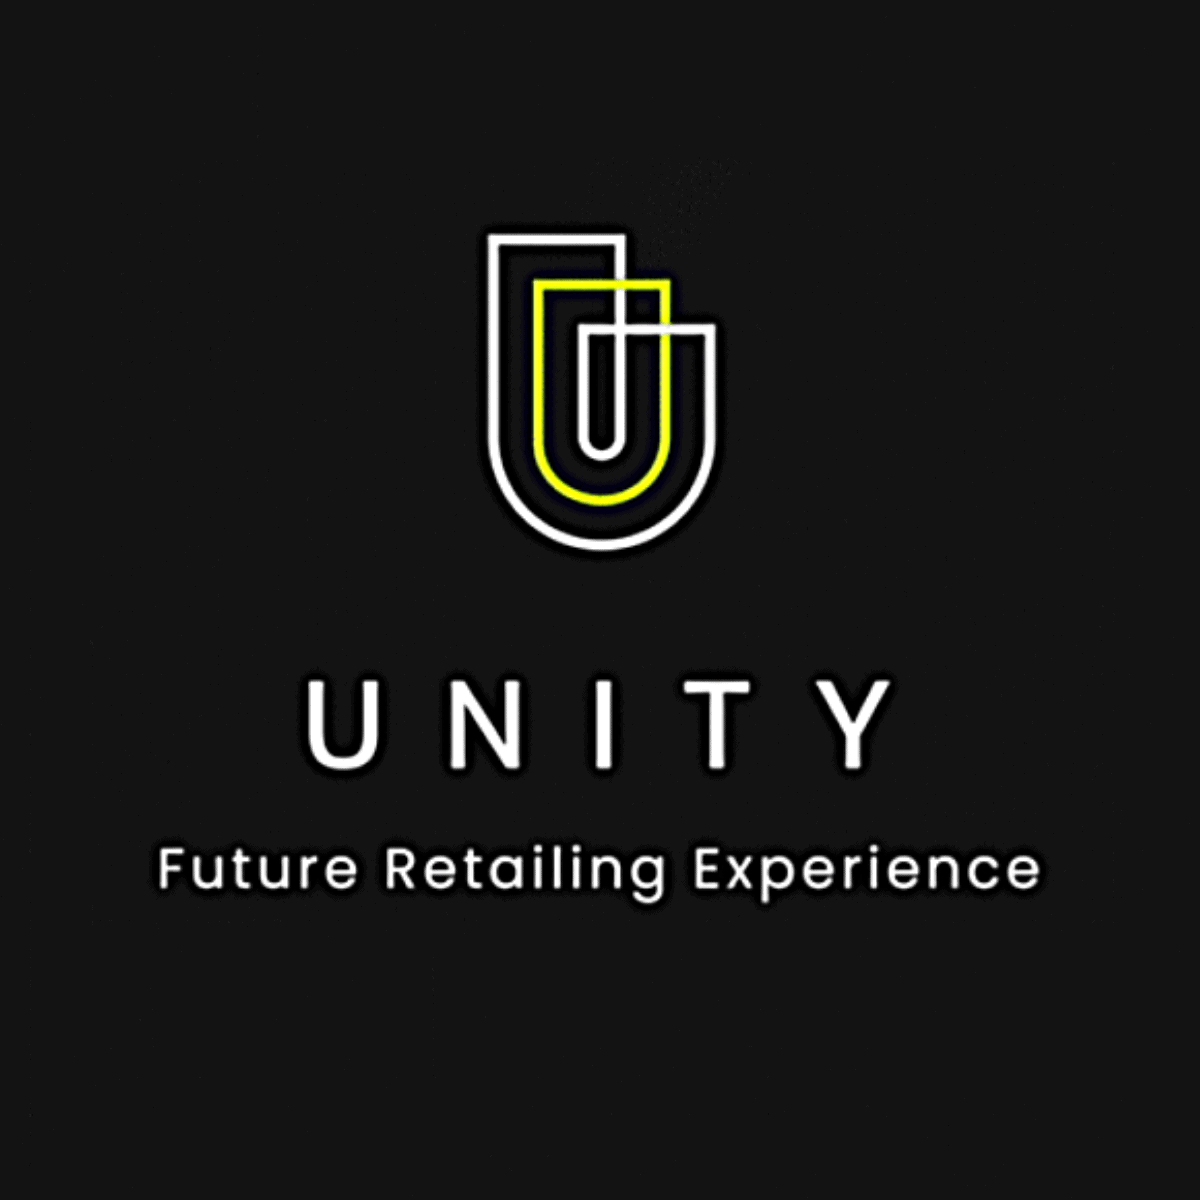 RFID supply chain retail temera fitting room customer experience, Corso Magenta participated in the UNITY project